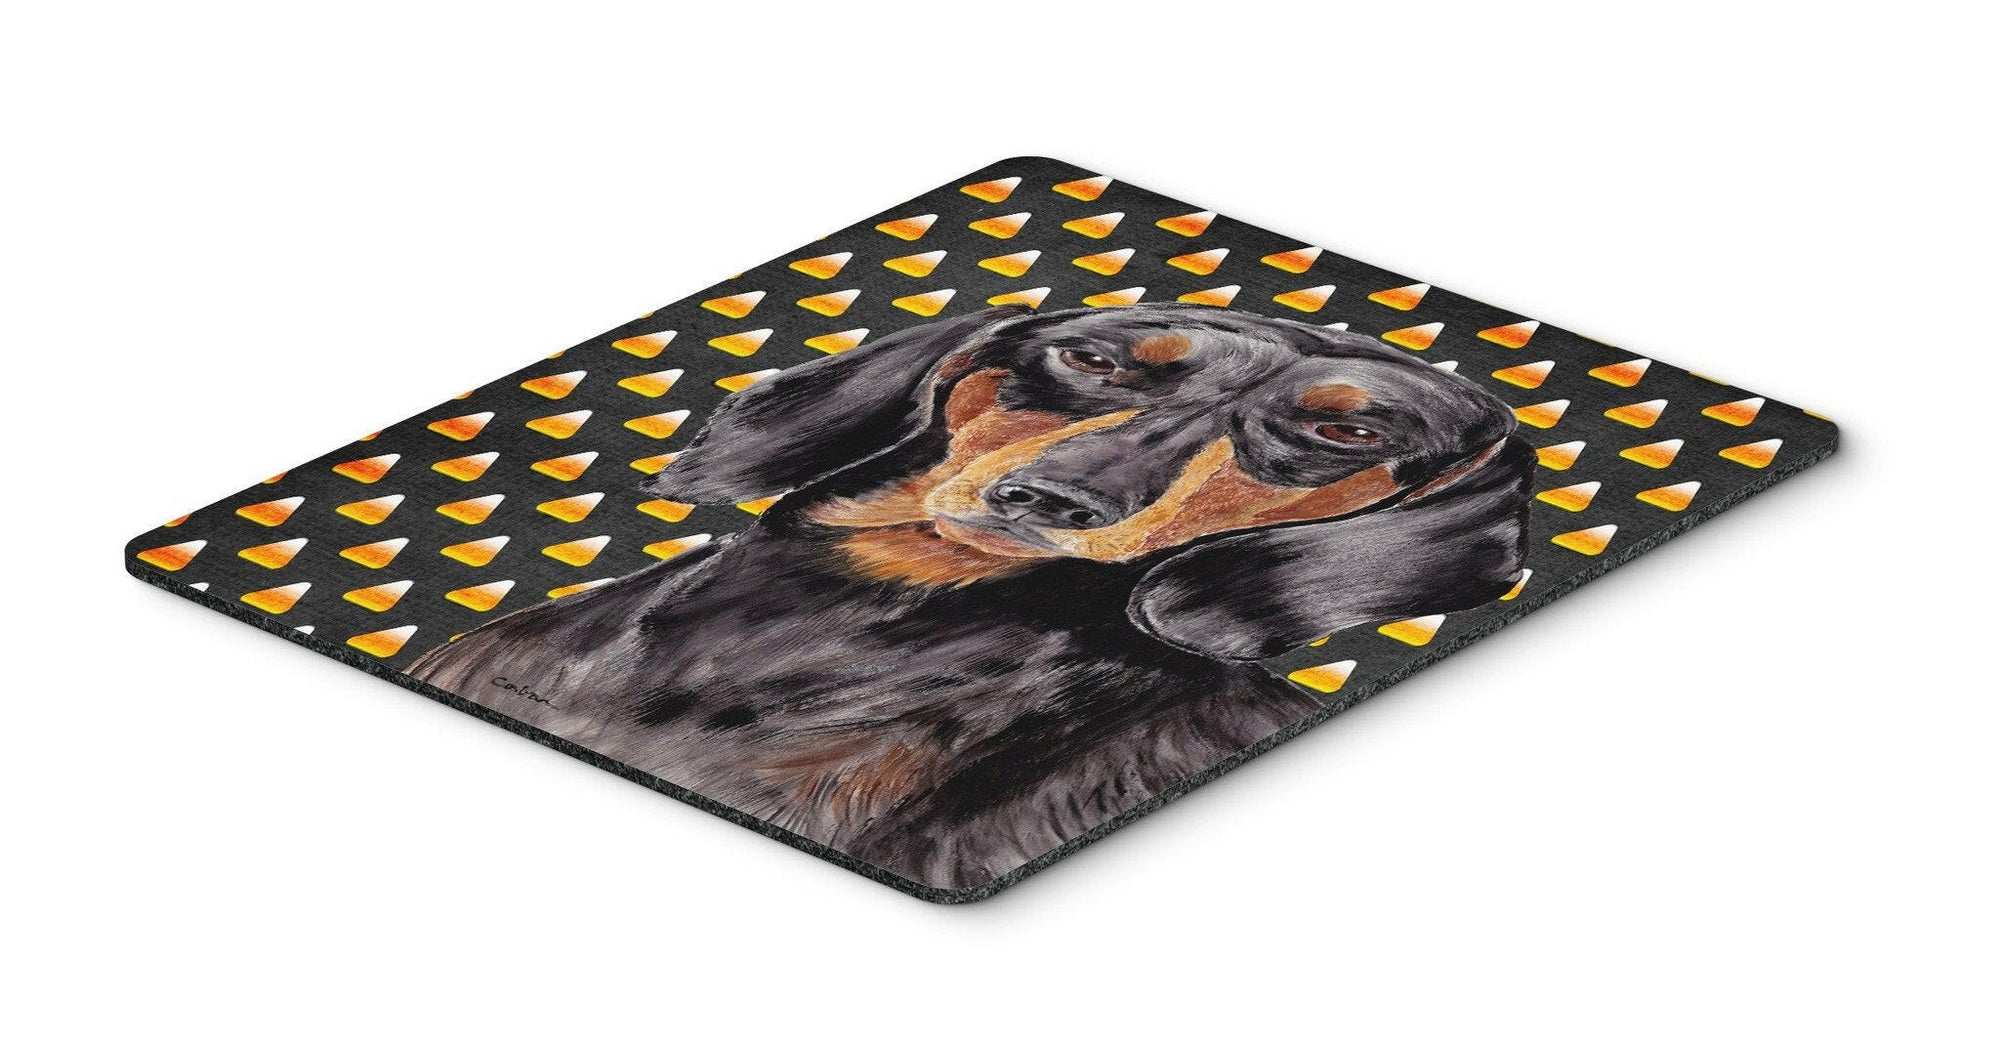 Dachshund Candy Corn Halloween Portrait Mouse Pad, Hot Pad or Trivet by Caroline's Treasures